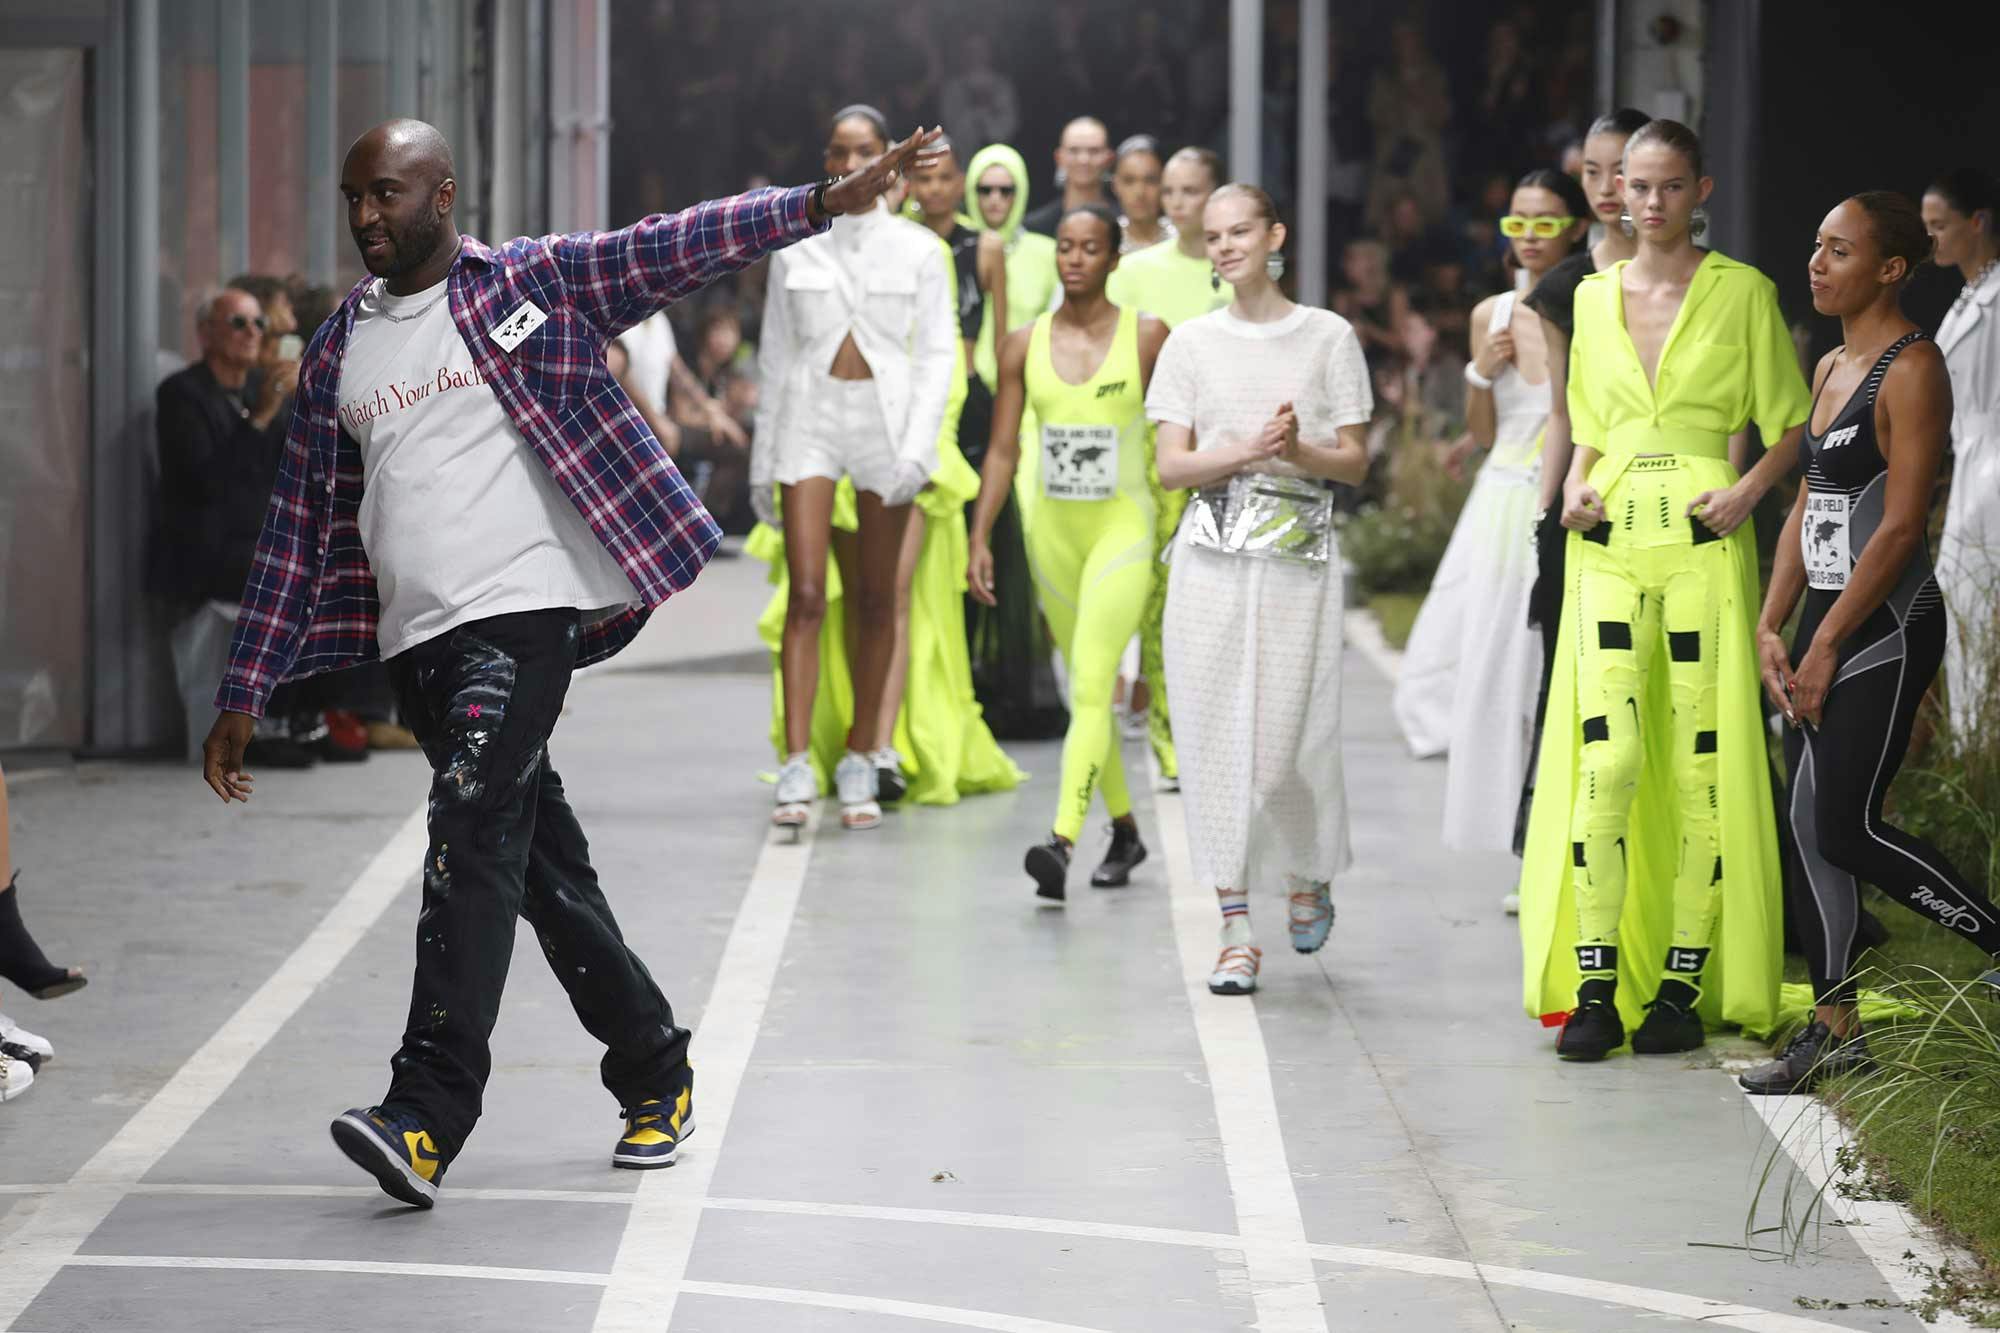 Virgil Abloh and his wife, Shannon